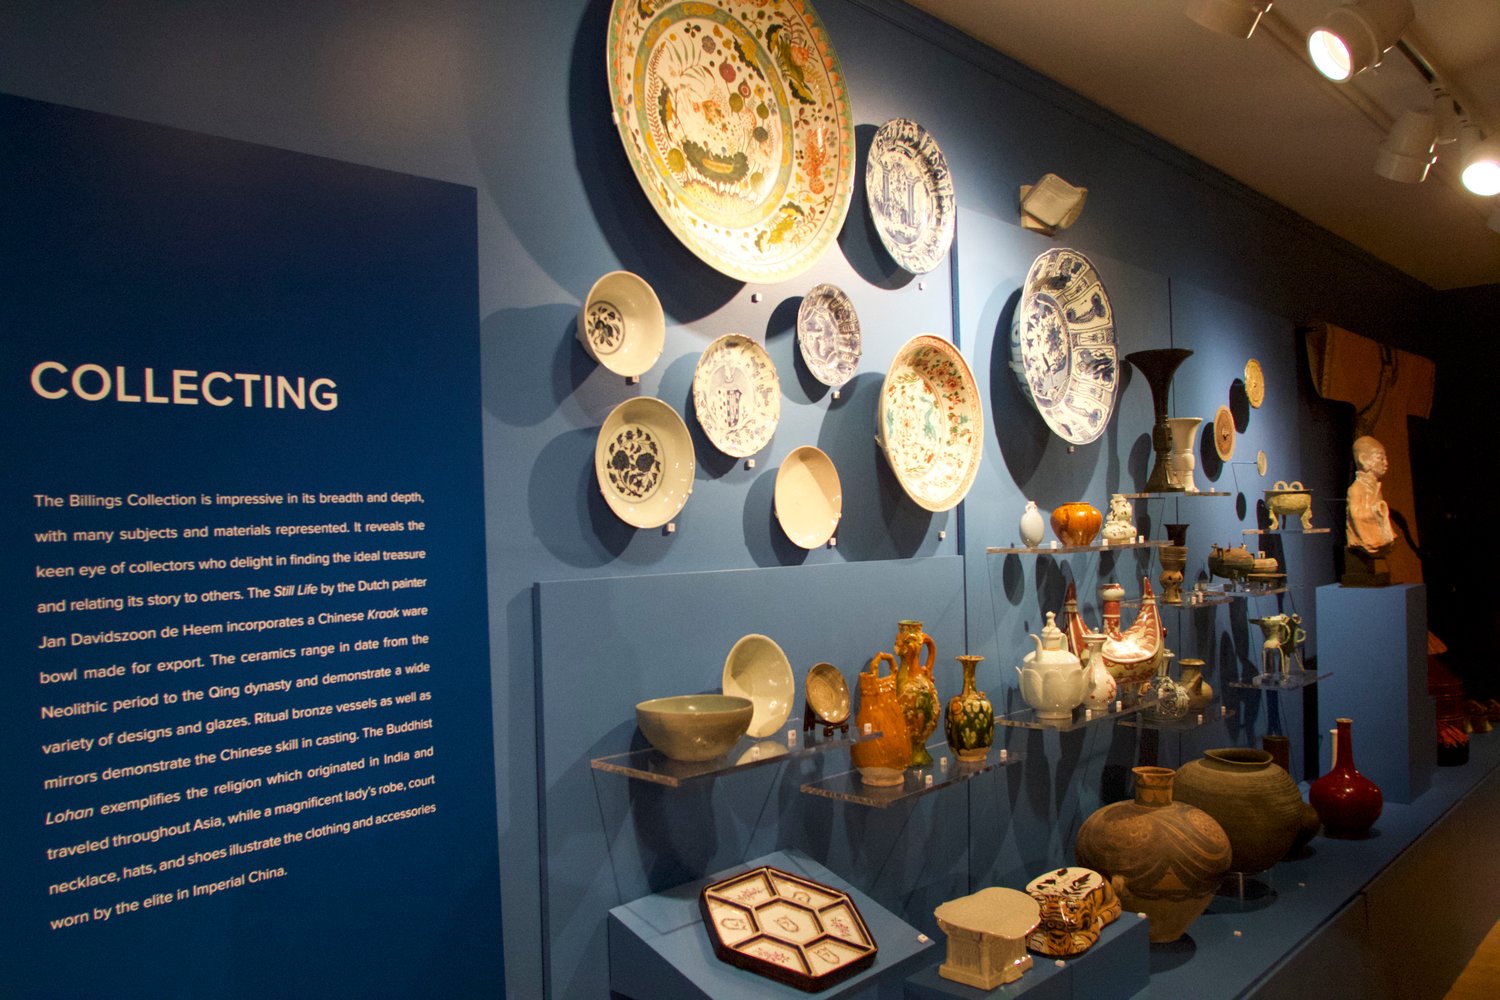 “The collection is so broad, and (the NHA) has selected pieces from so much of it that it’s inconceivable to think you couldn’t find one piece, one thing, that’s not of interest,” Billings said.